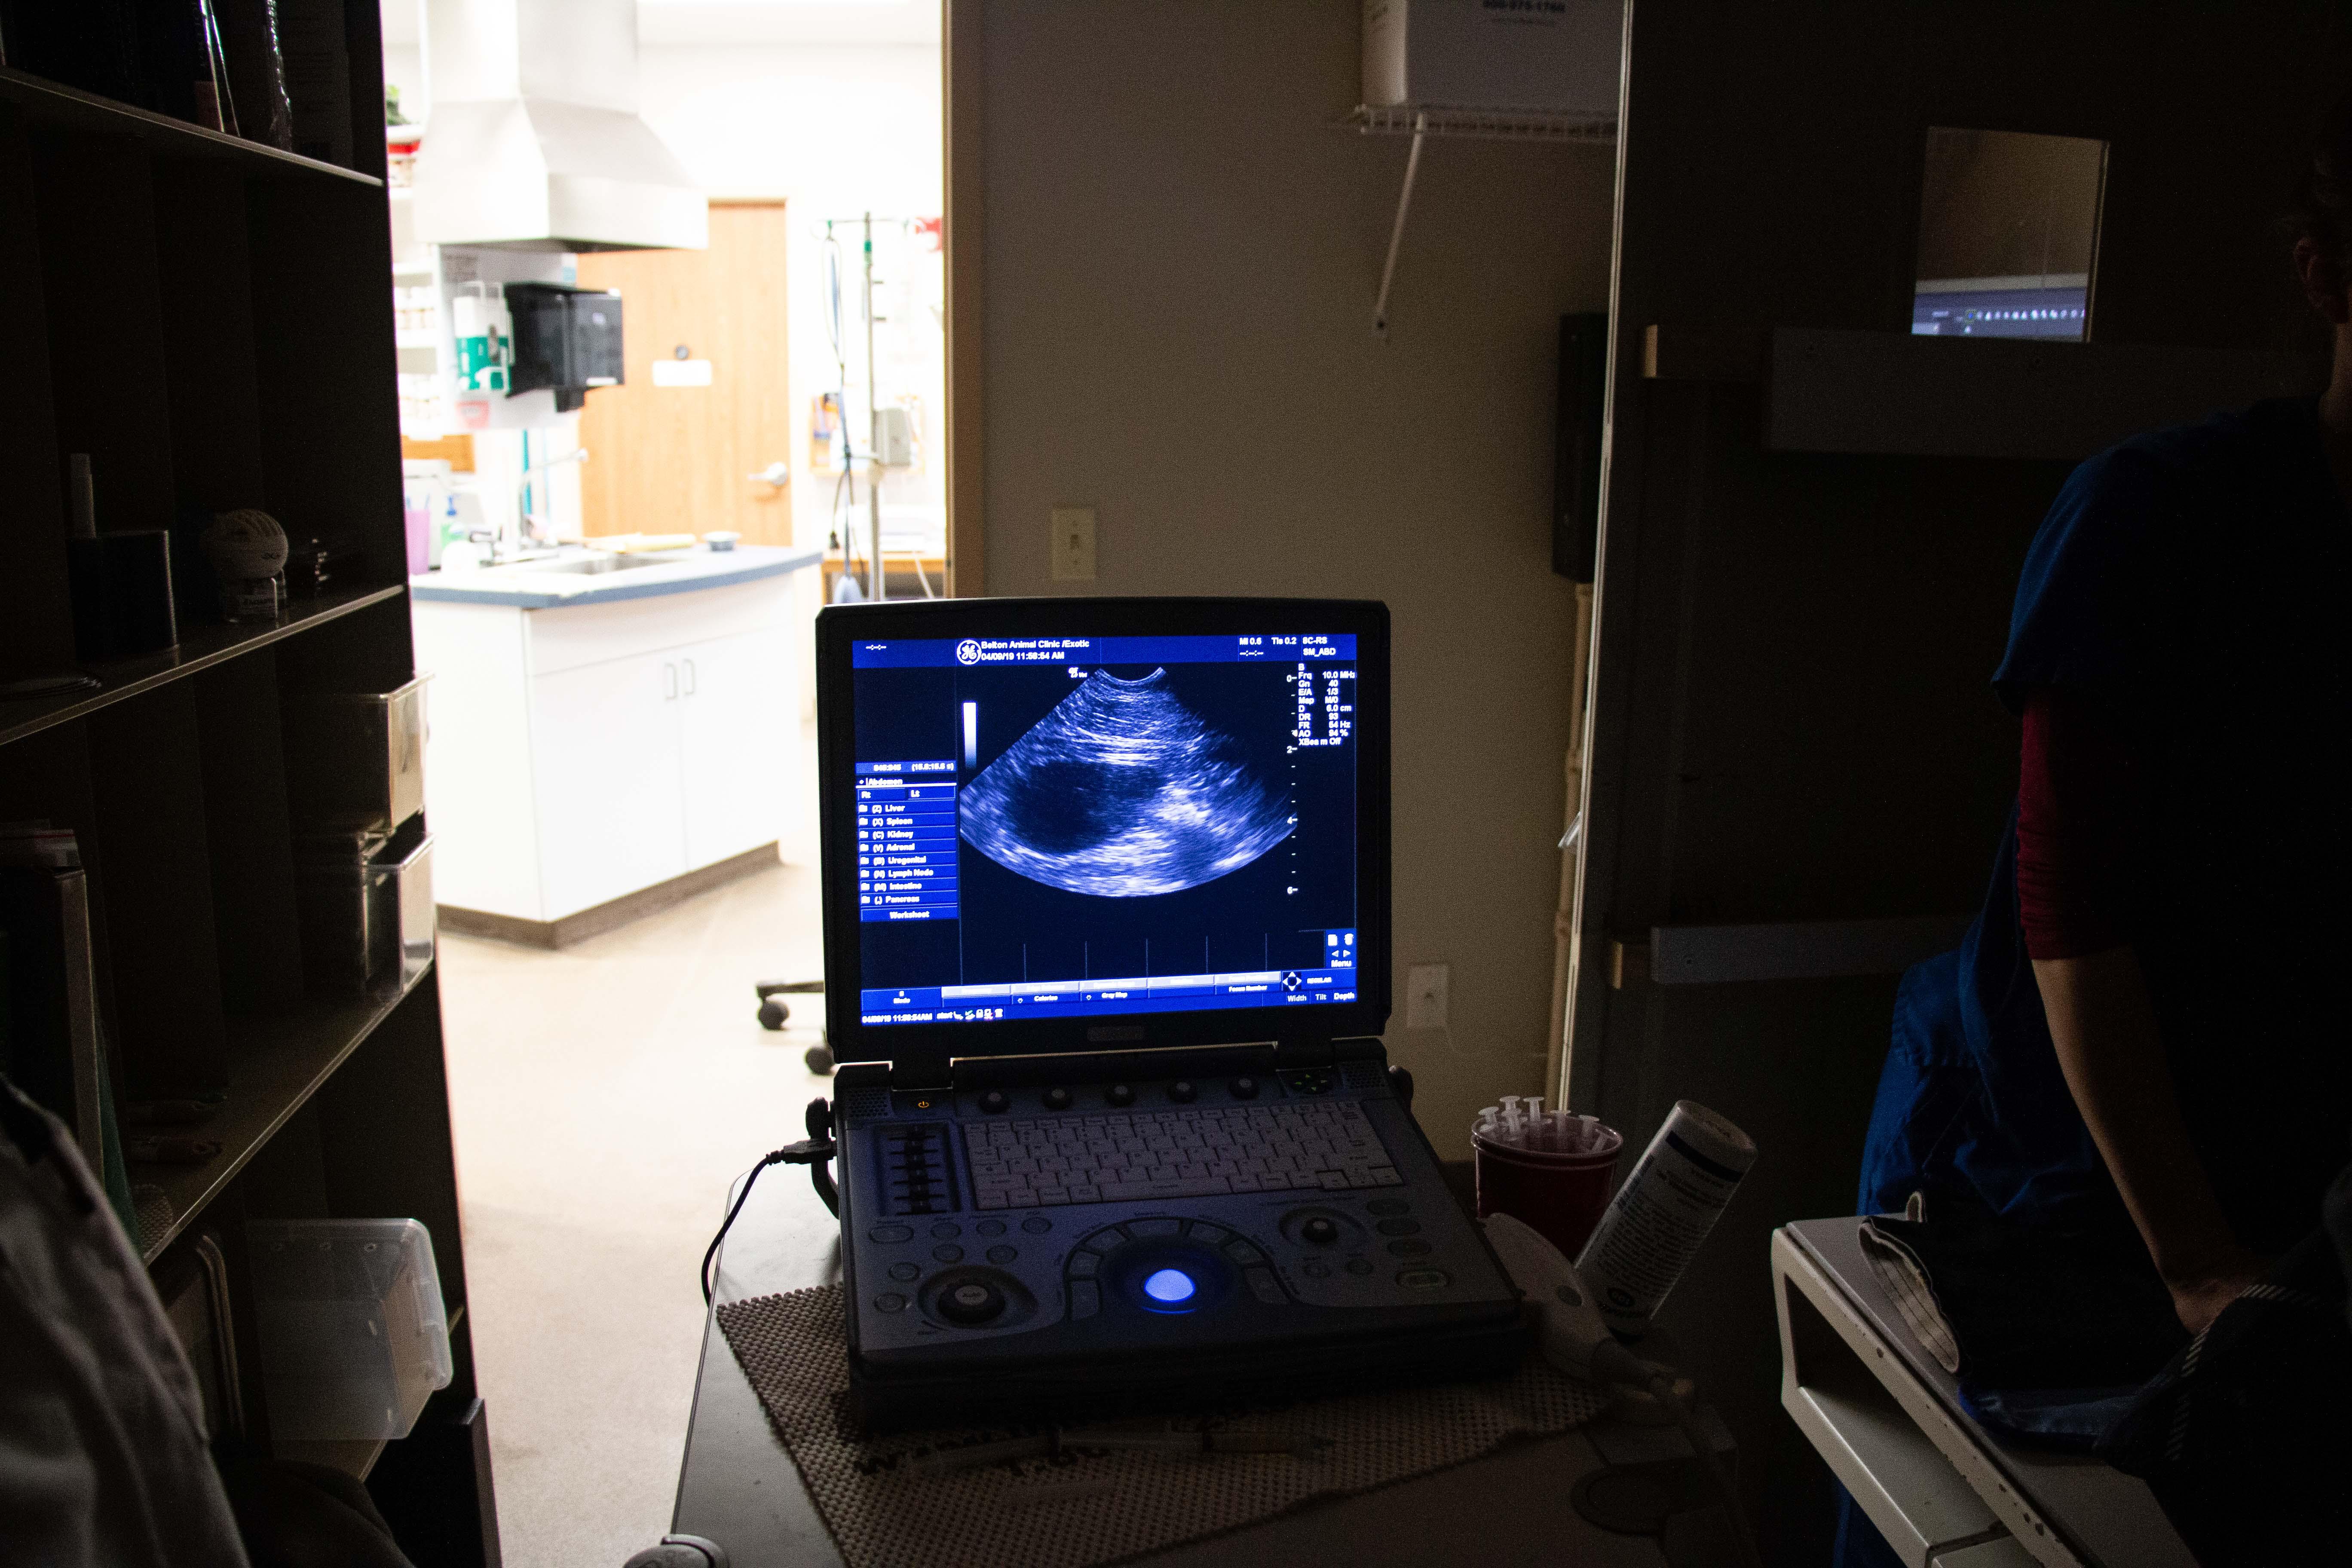 Belton Animal Clinic & Exotic Care Center has invested in modern ultrasound technology, which allows our medical team to examine internal organs and soft tissues.